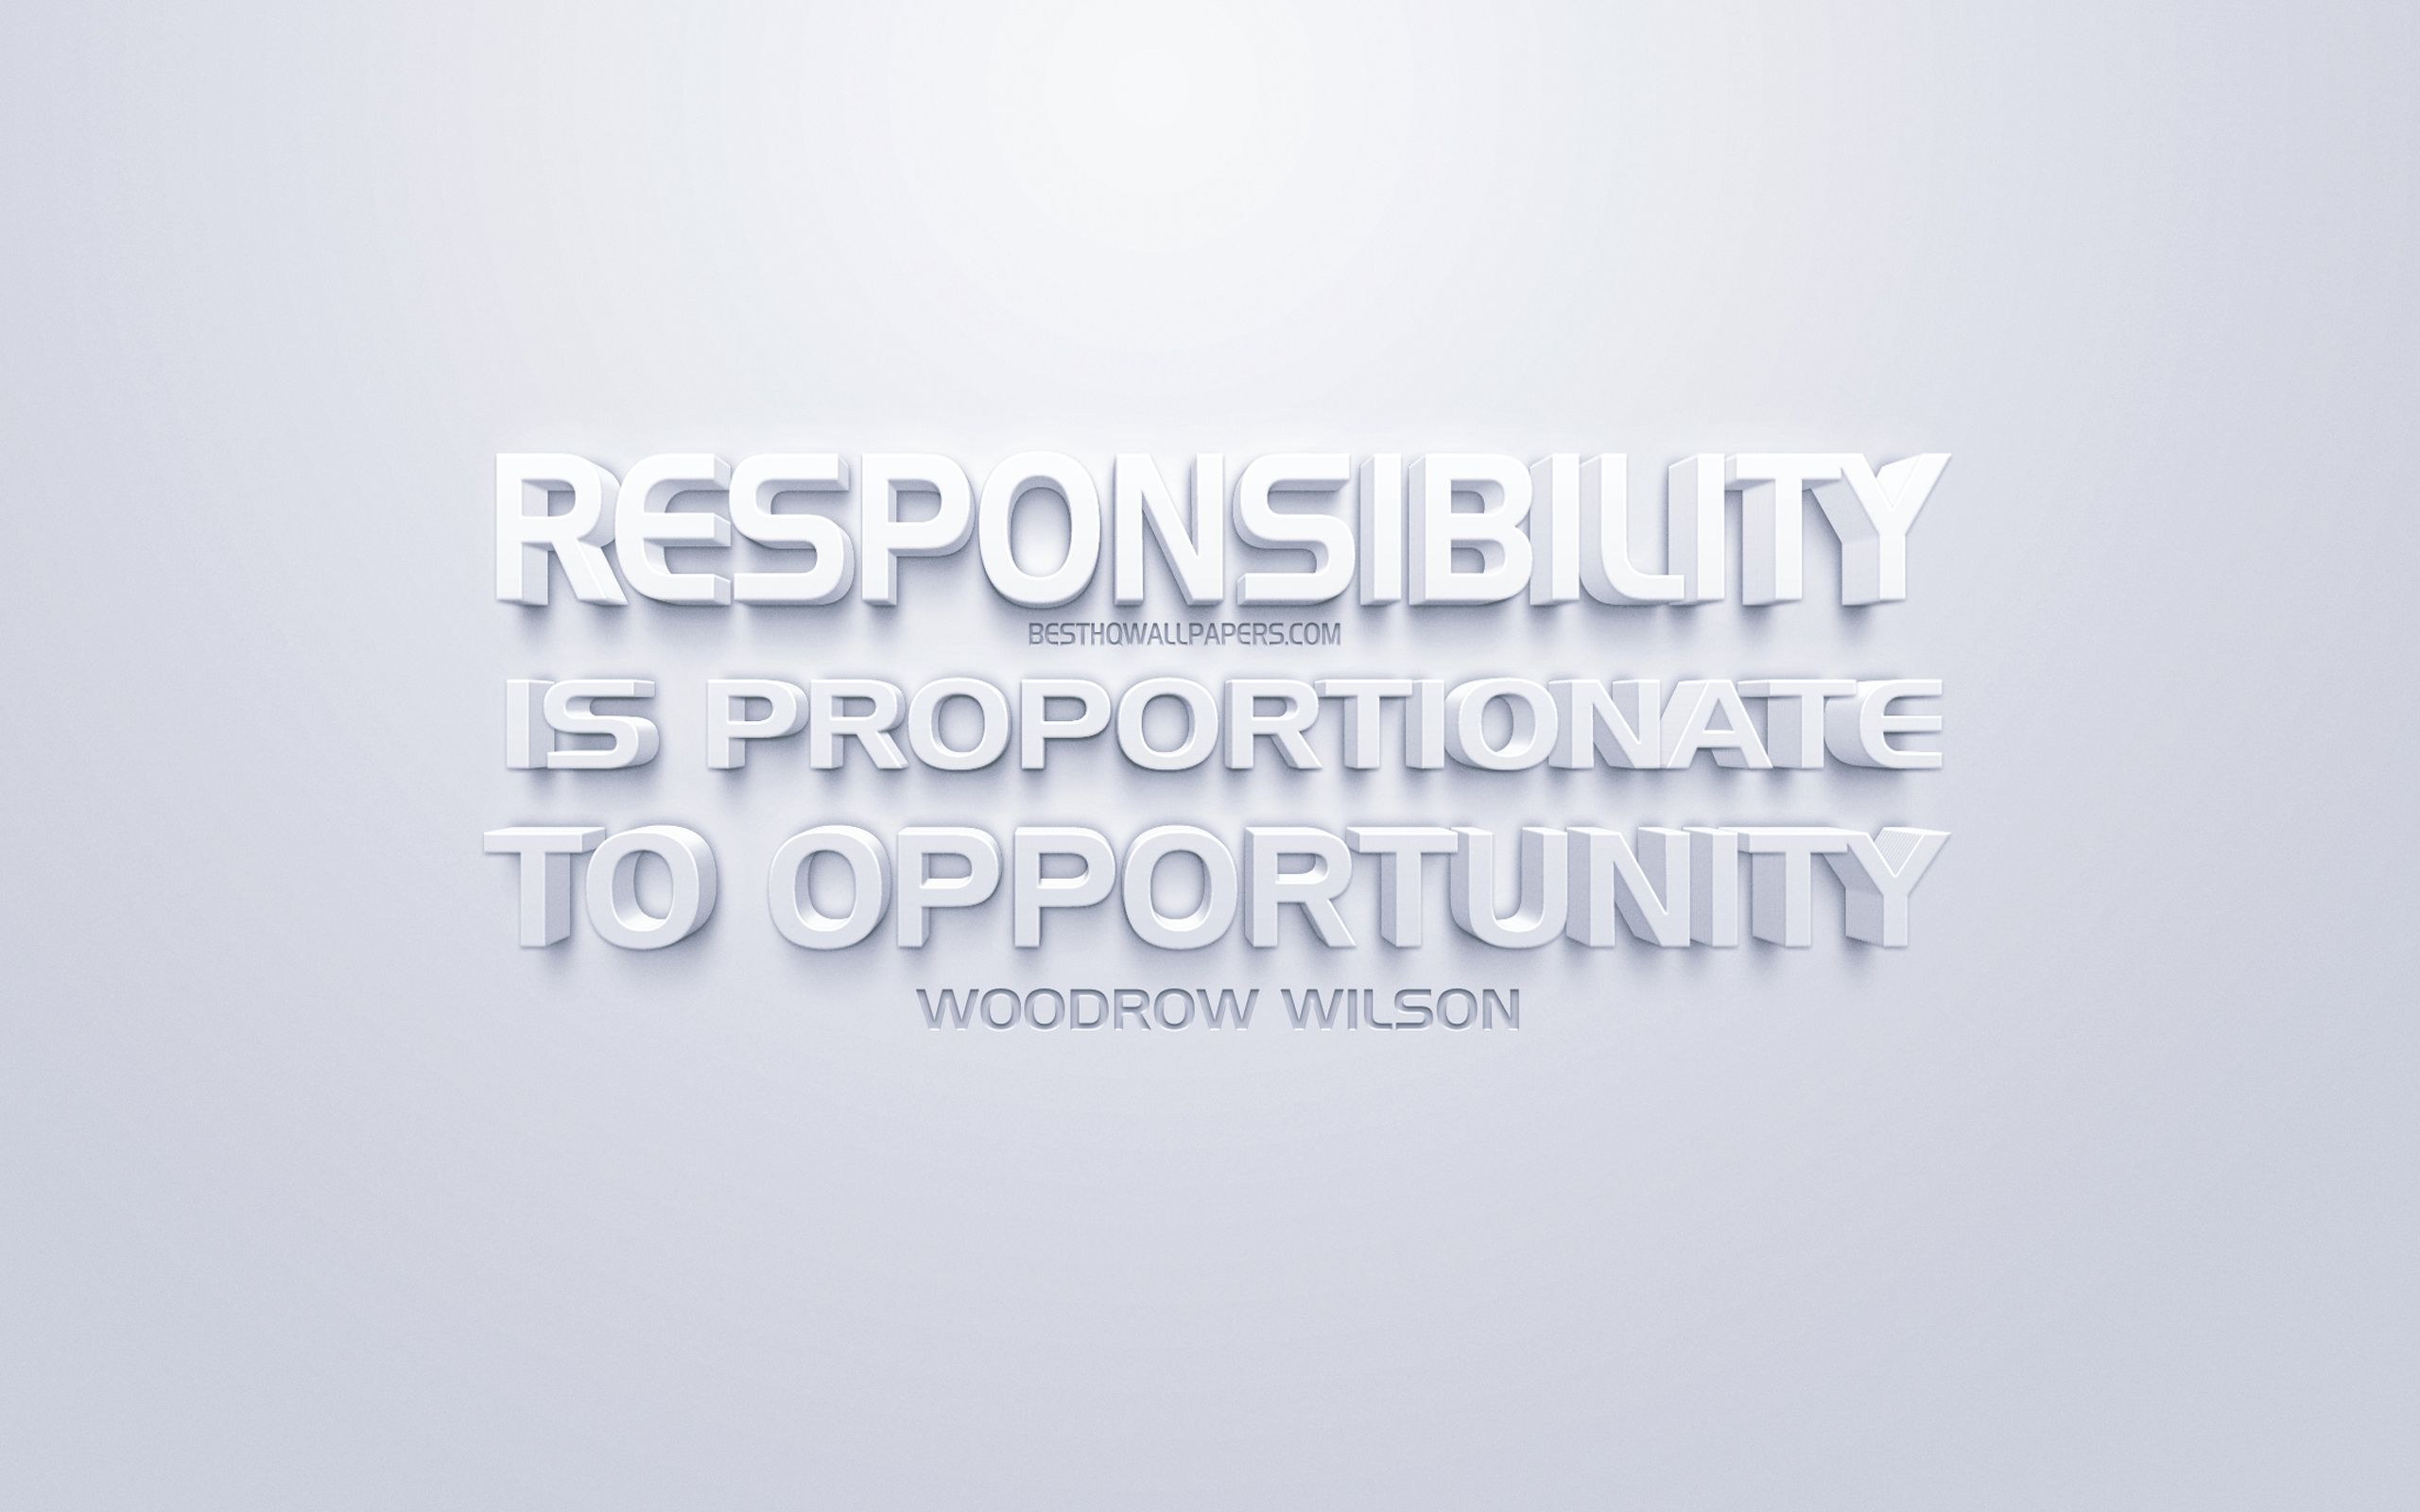 Download wallpaper Responsibility is proportionate to opportunity, Woodrow Wilson quotes, white quotes, quotes, inspiration, white background, motivation for desktop with resolution 2560x1600. High Quality HD picture wallpaper